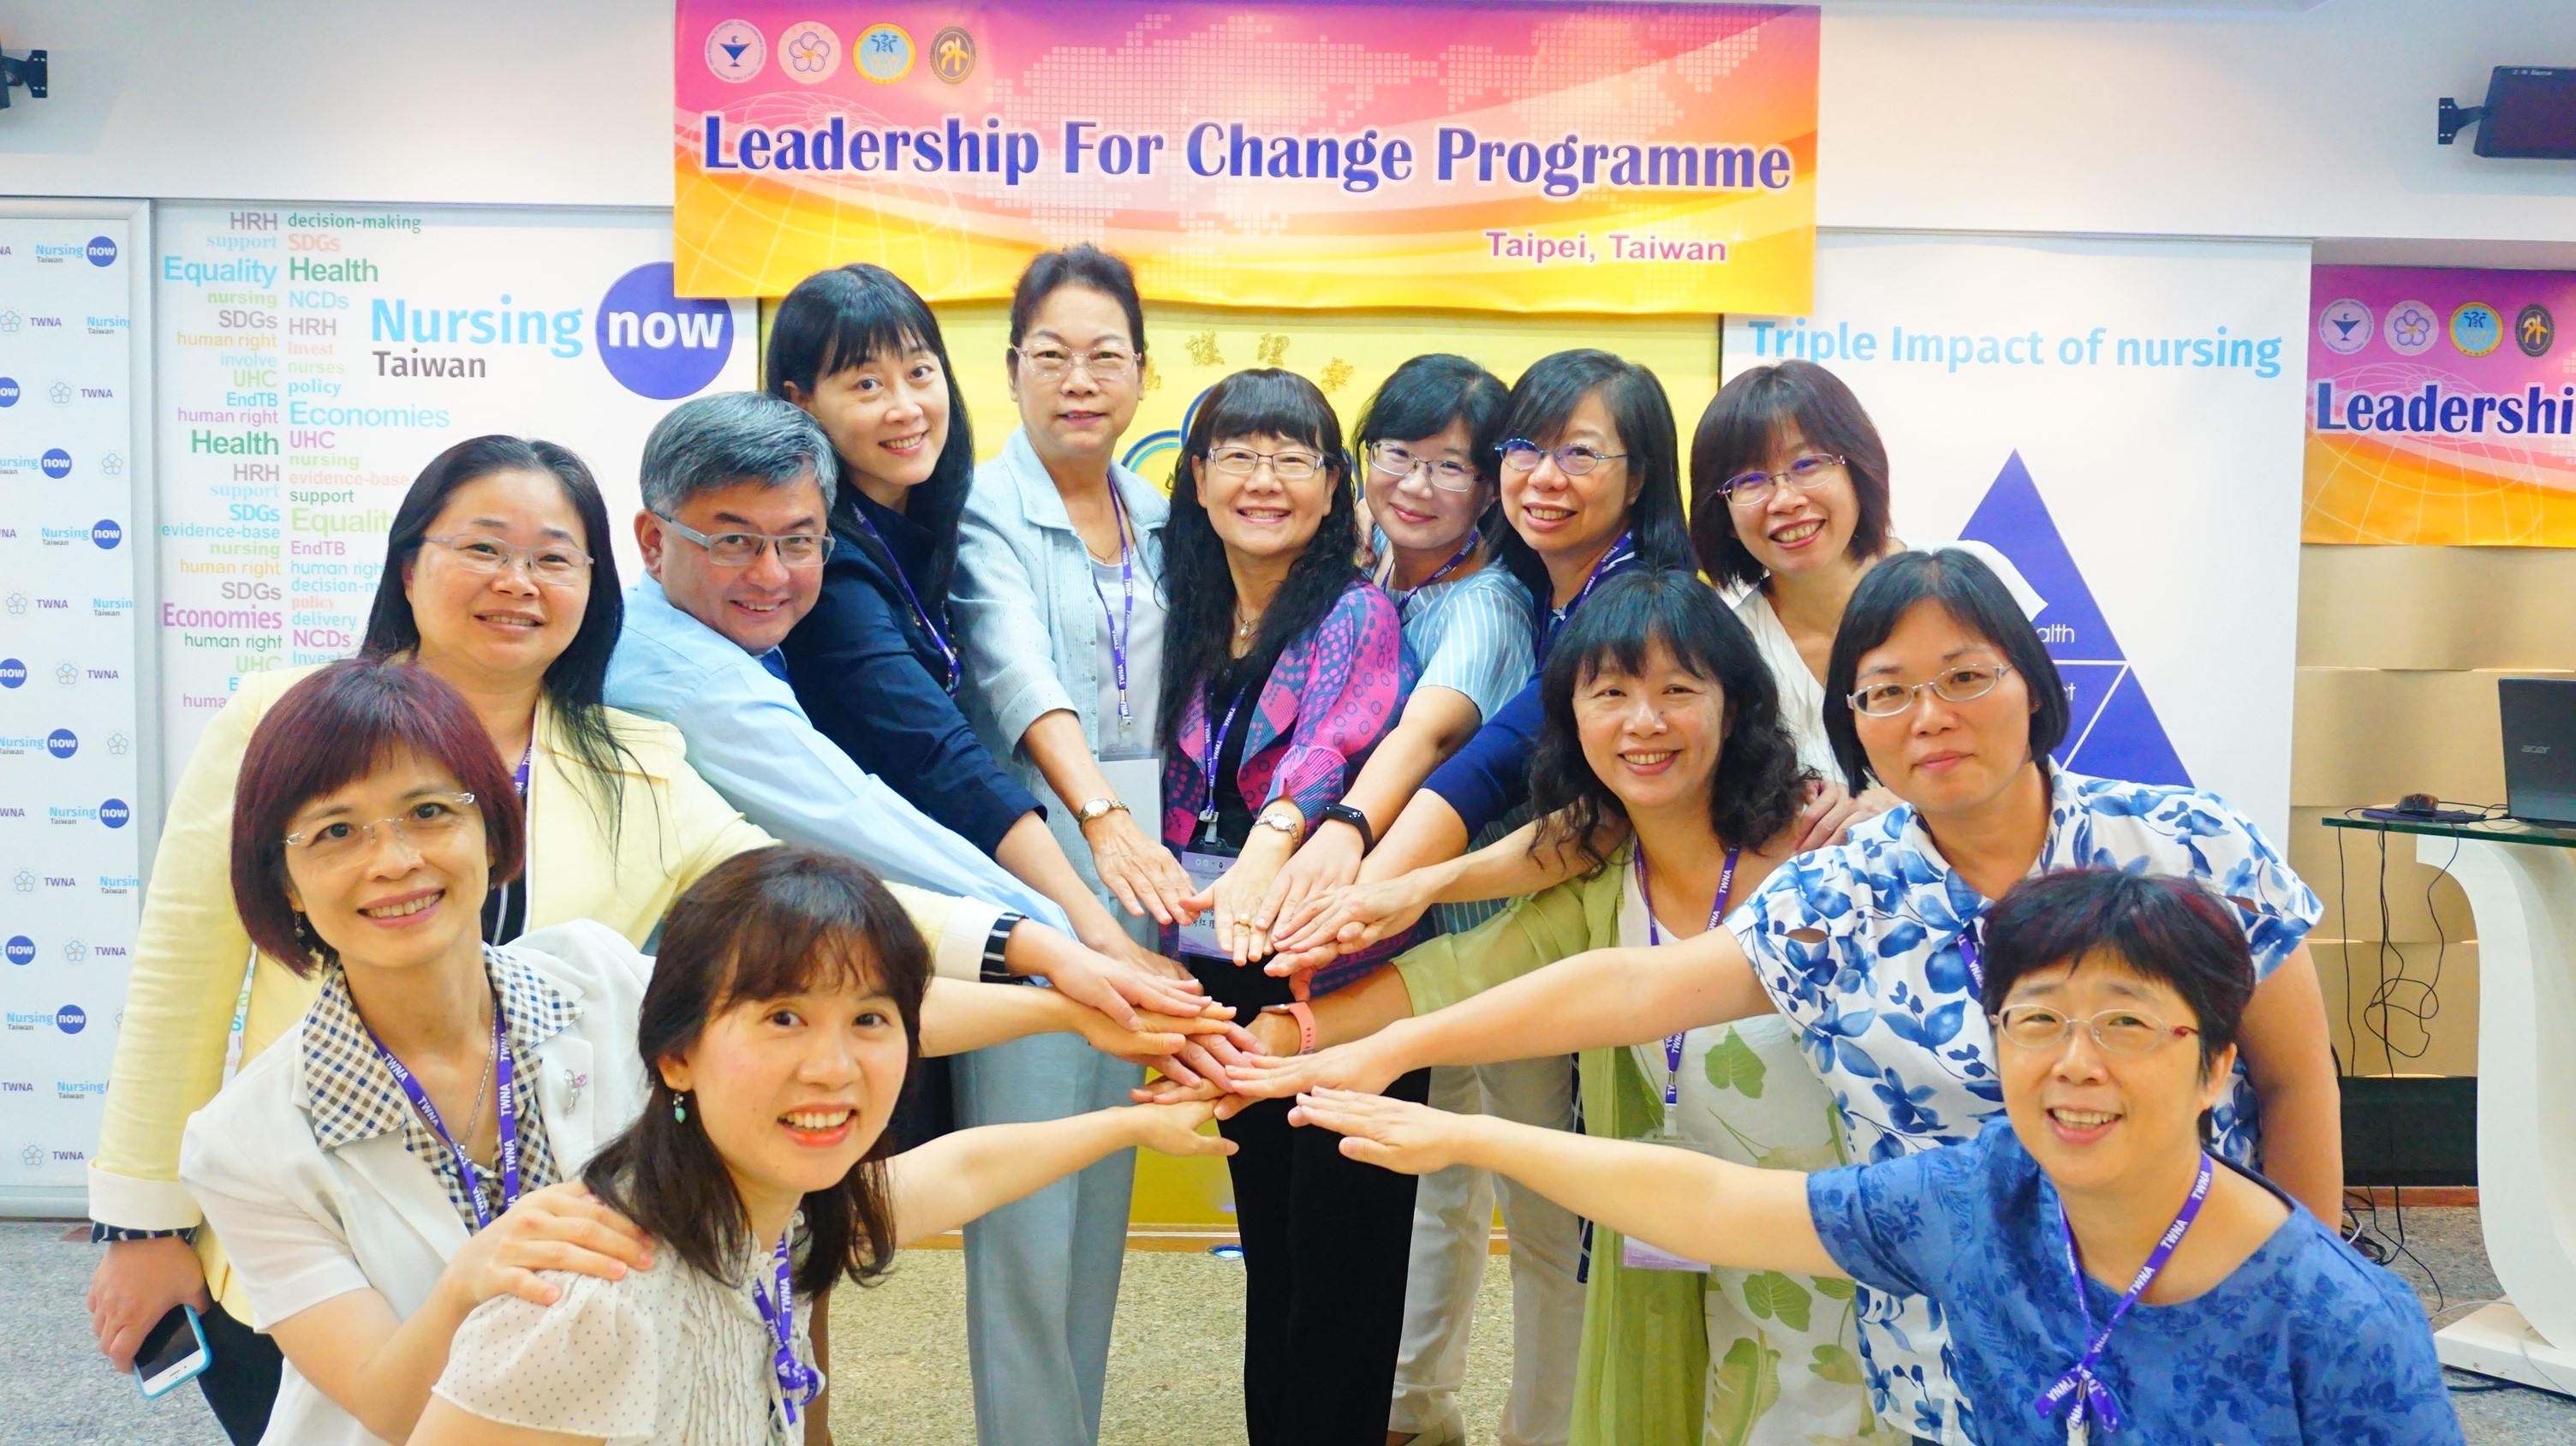 The TWNA 13 trainers are available to provide regional LFC™ Programme in Asia